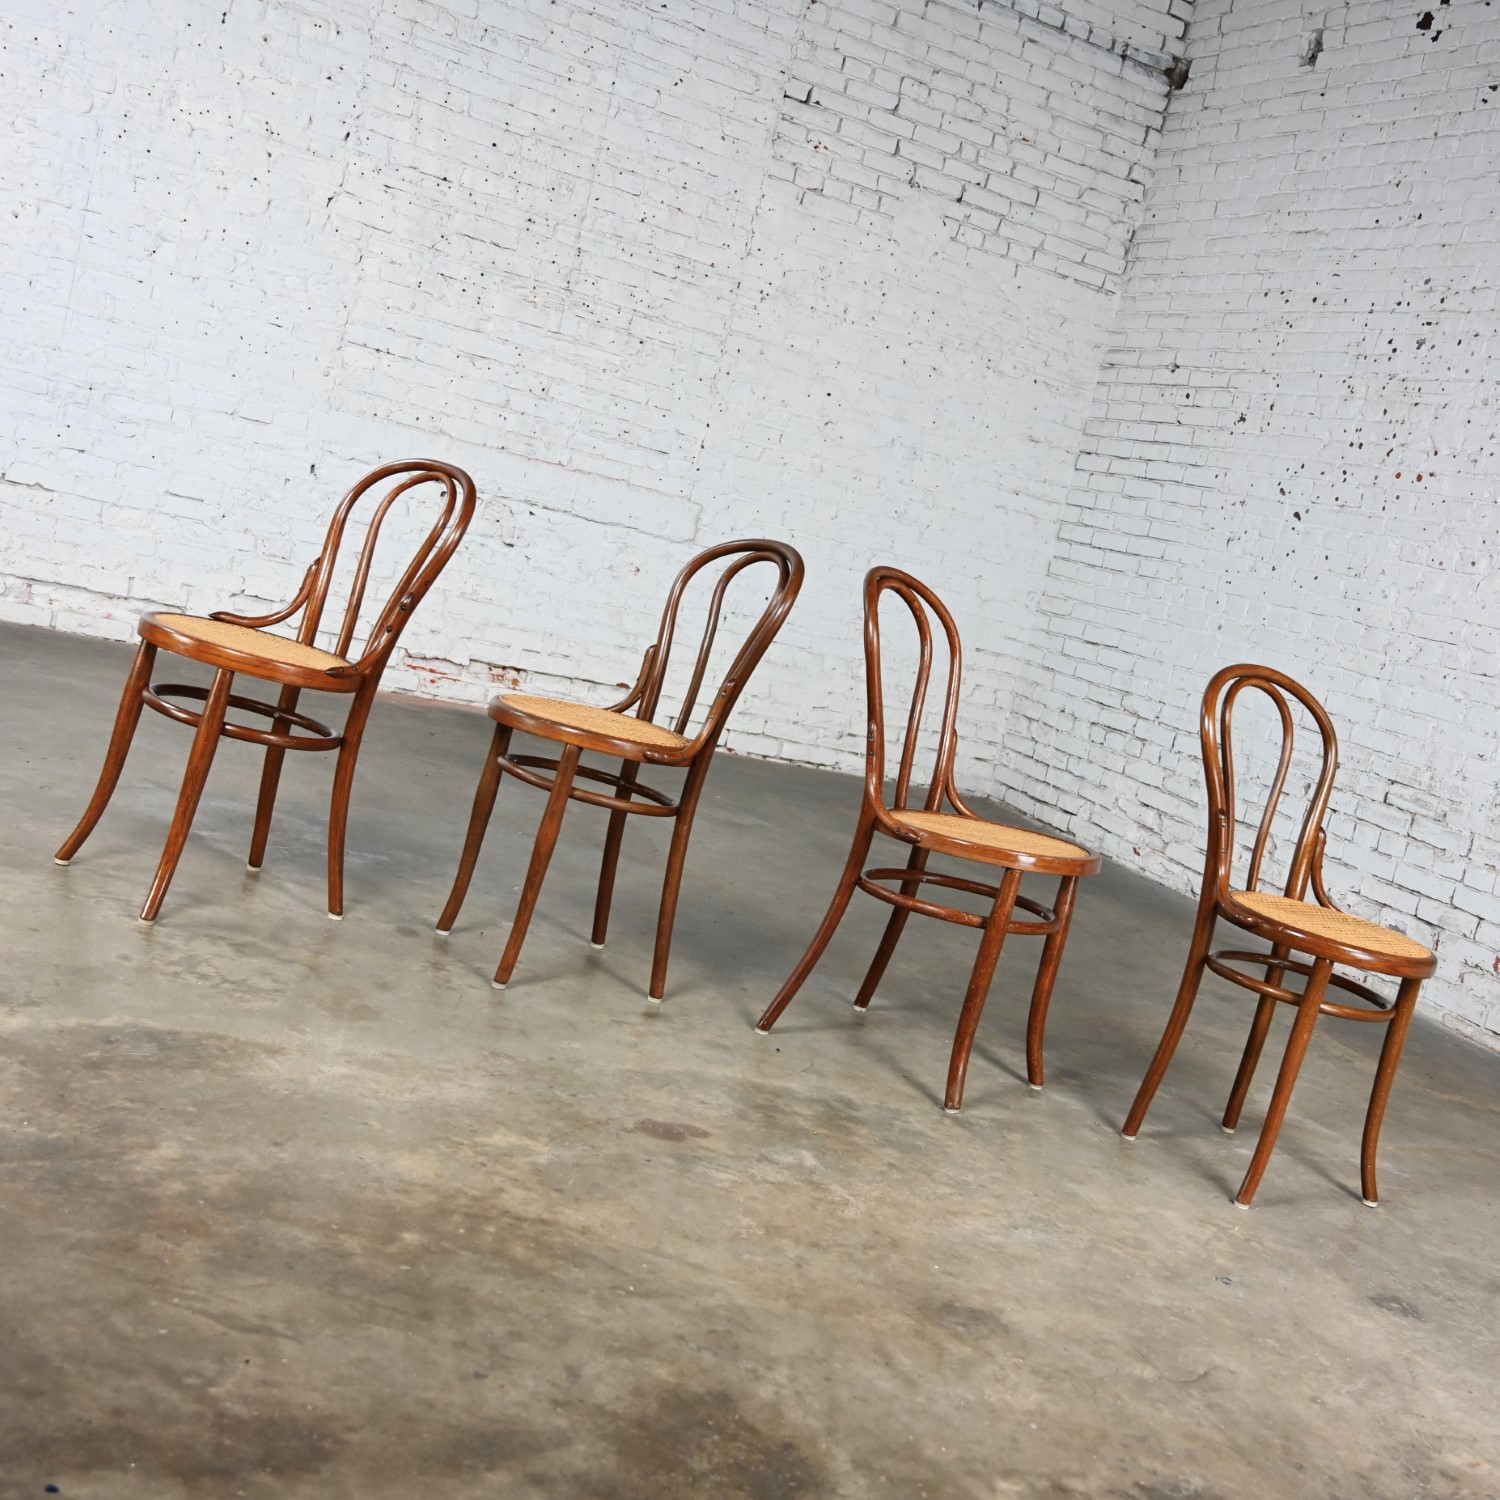 Four Late 19th to Early 20th Century Bauhaus Style #18 Café Chairs by Thonet Bentwood Frames & Hand Caned Seats